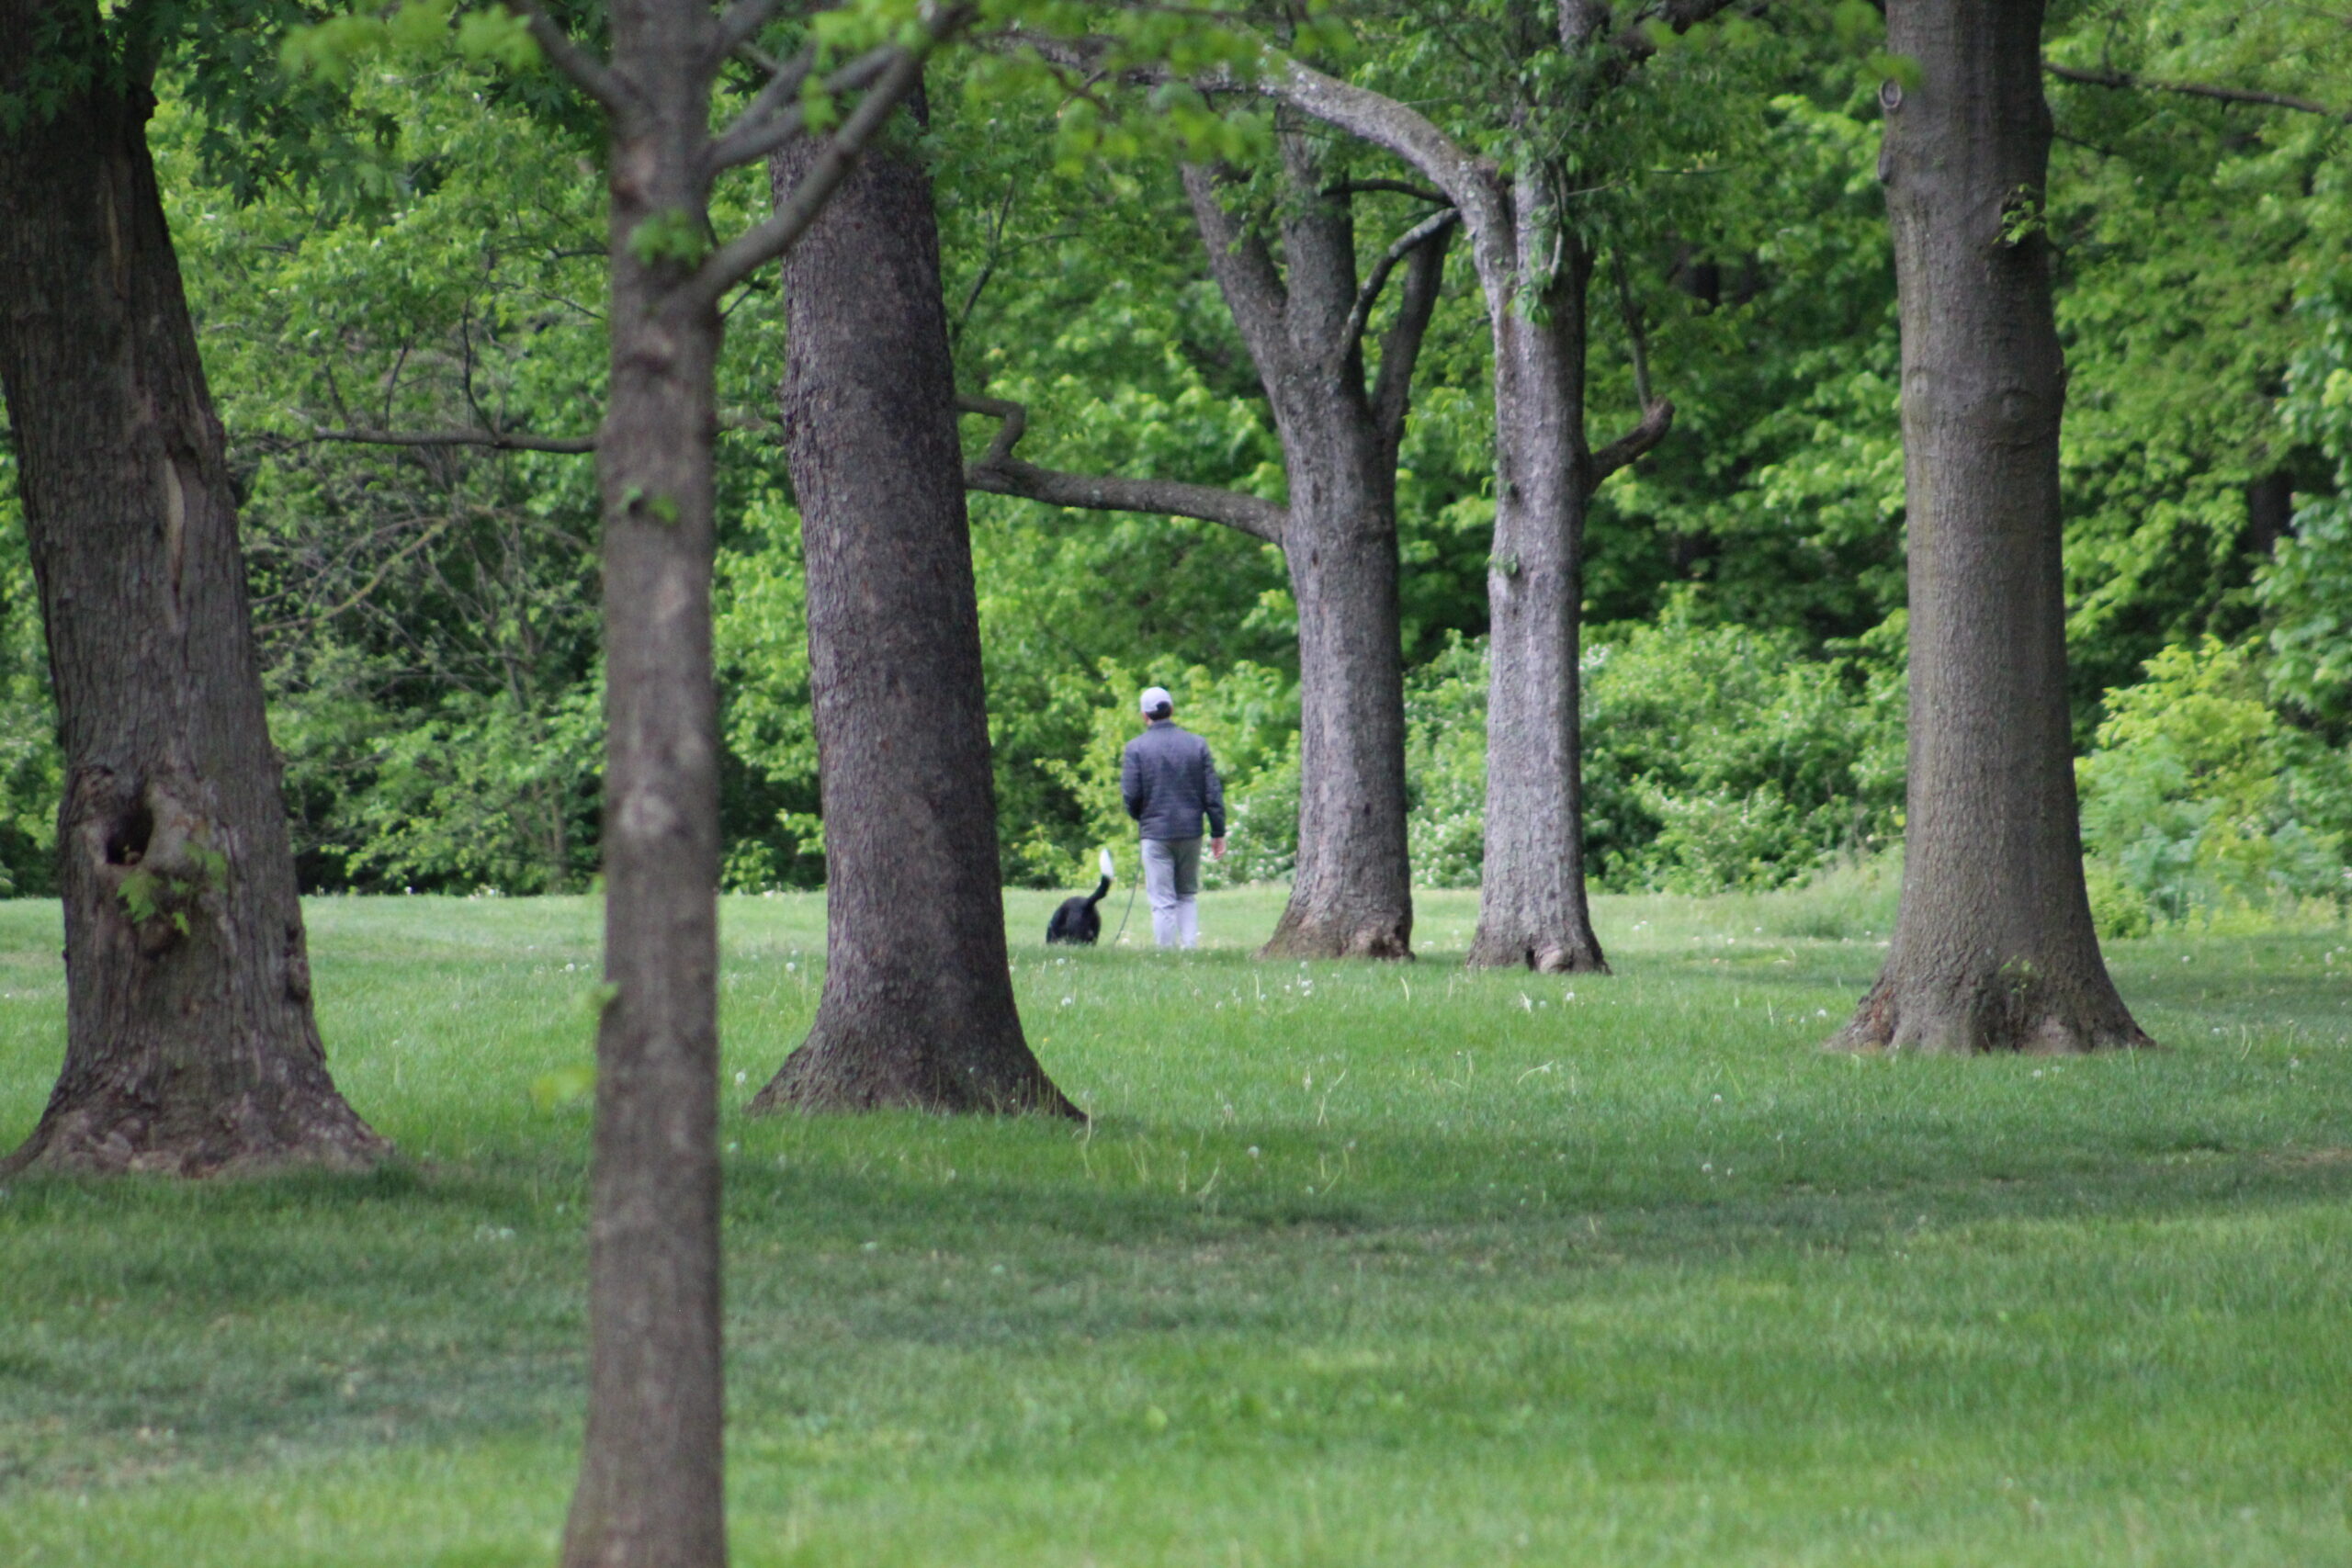 Frederick’s Park and Recreation Department, nonprofits use nature to aid mental health